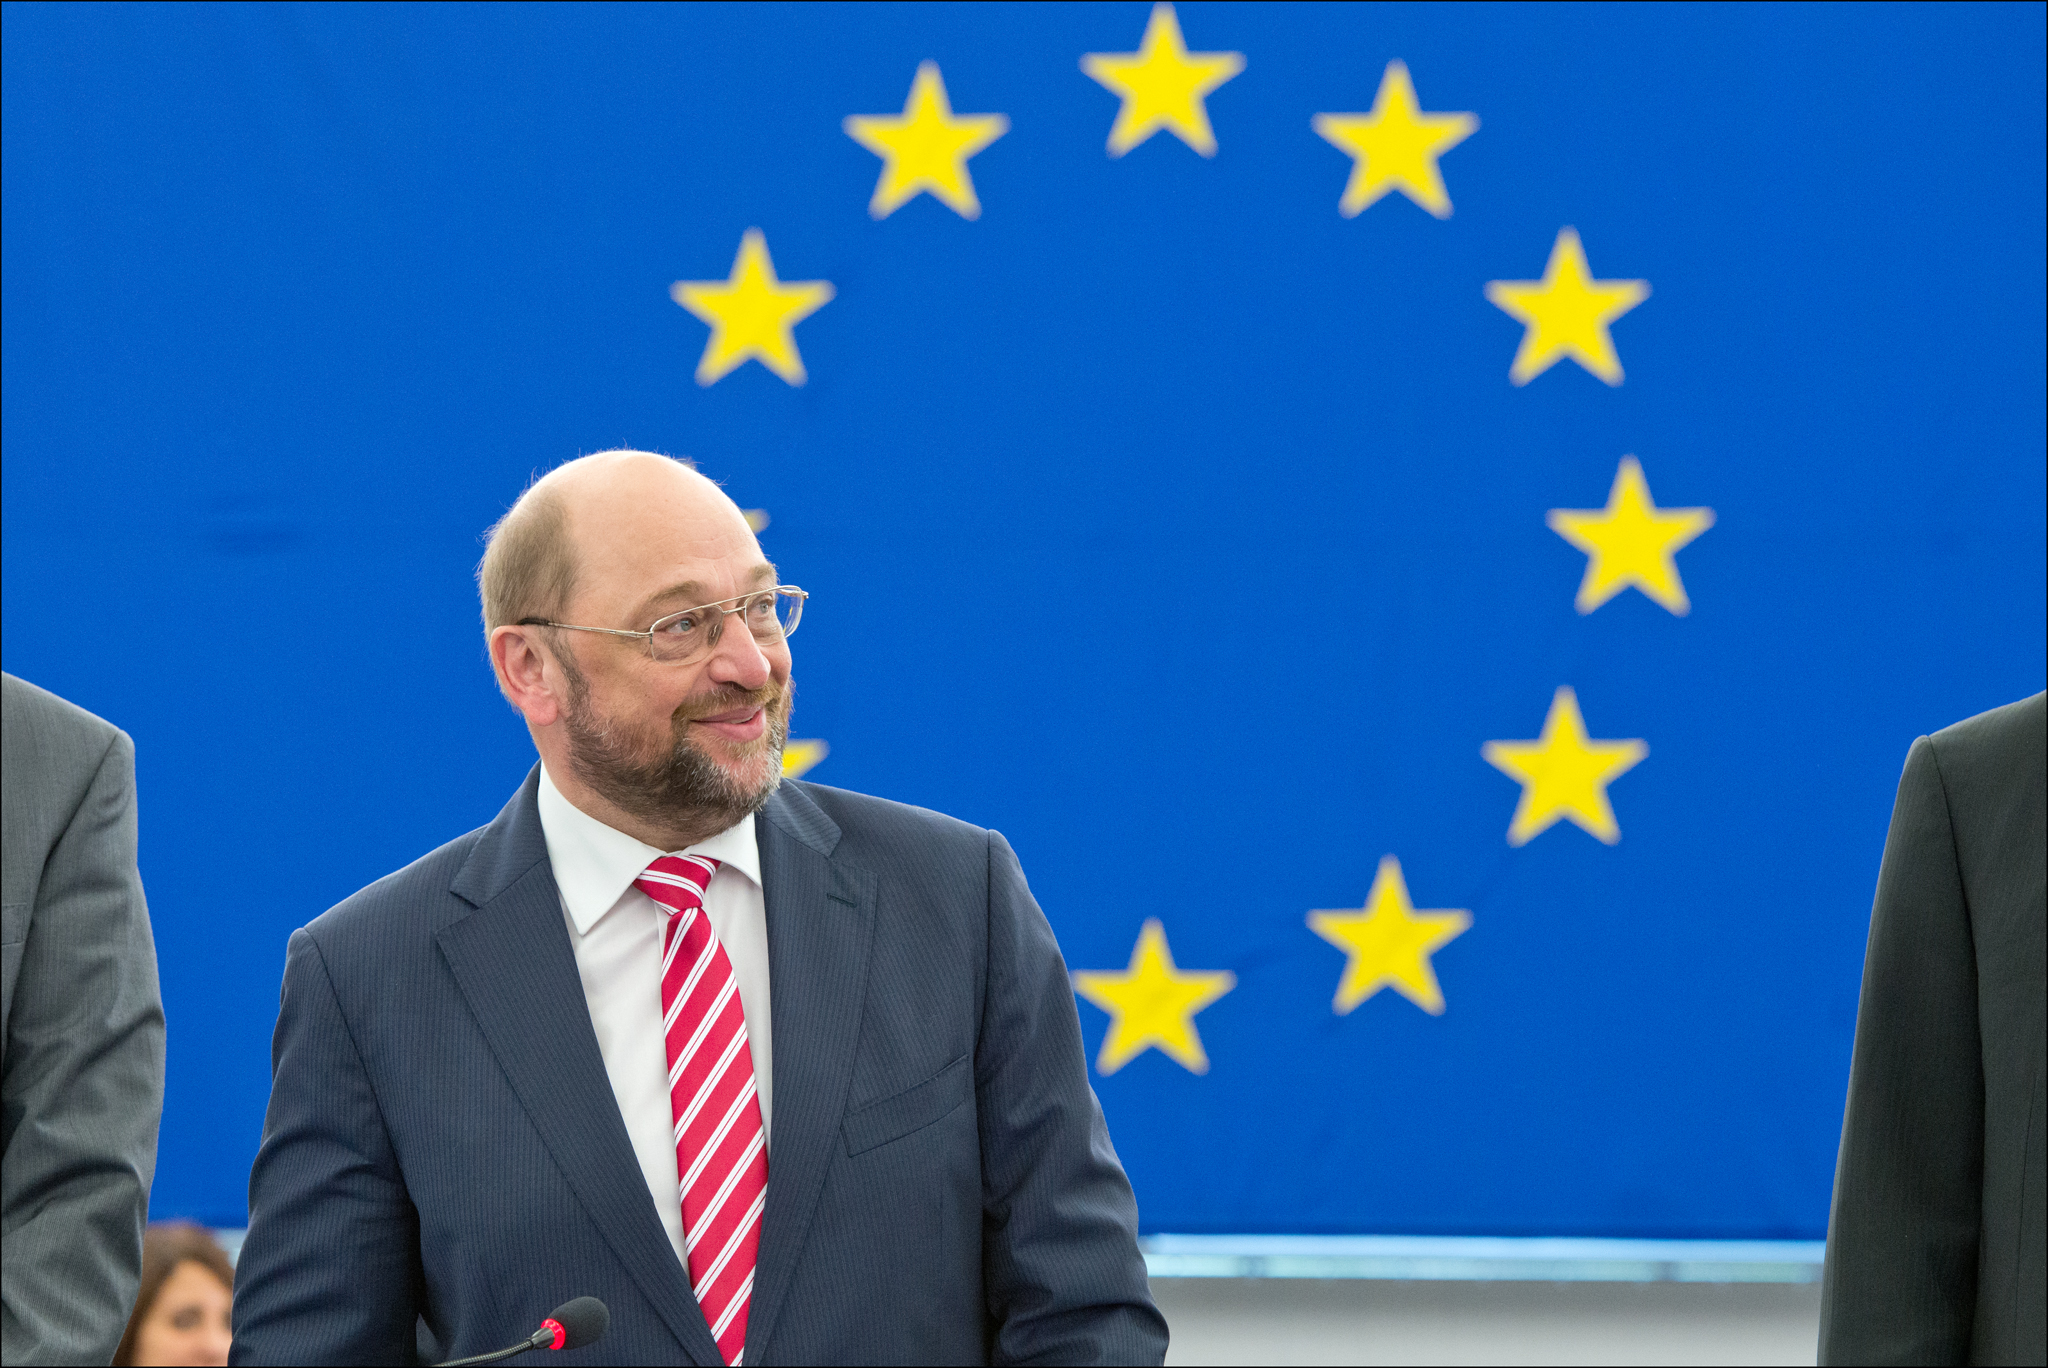 The new president of the European Parliament, Martin Schulz (by EP)